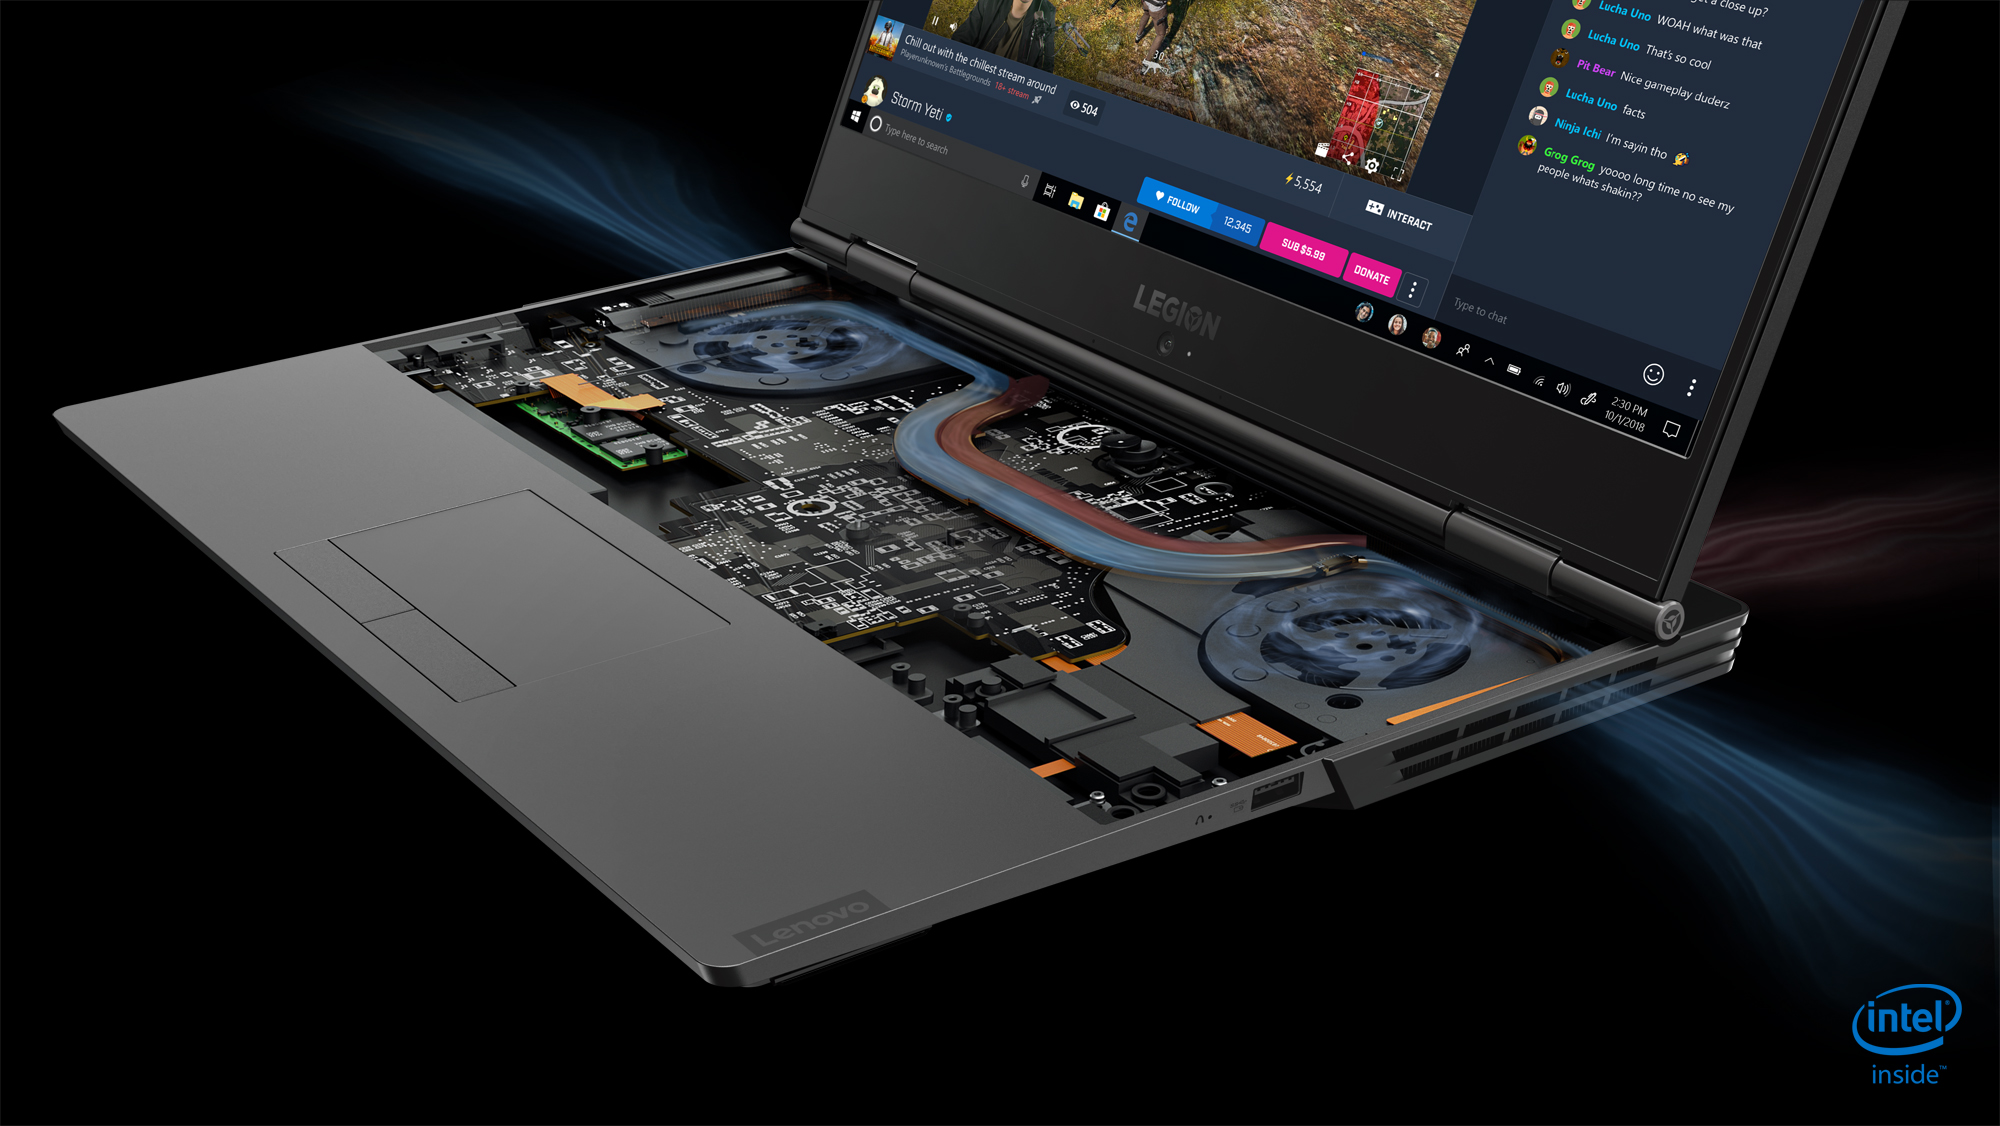 lenovo new legion gaming laptops ces 2019 01 y740 nootebook 15inch thermal design